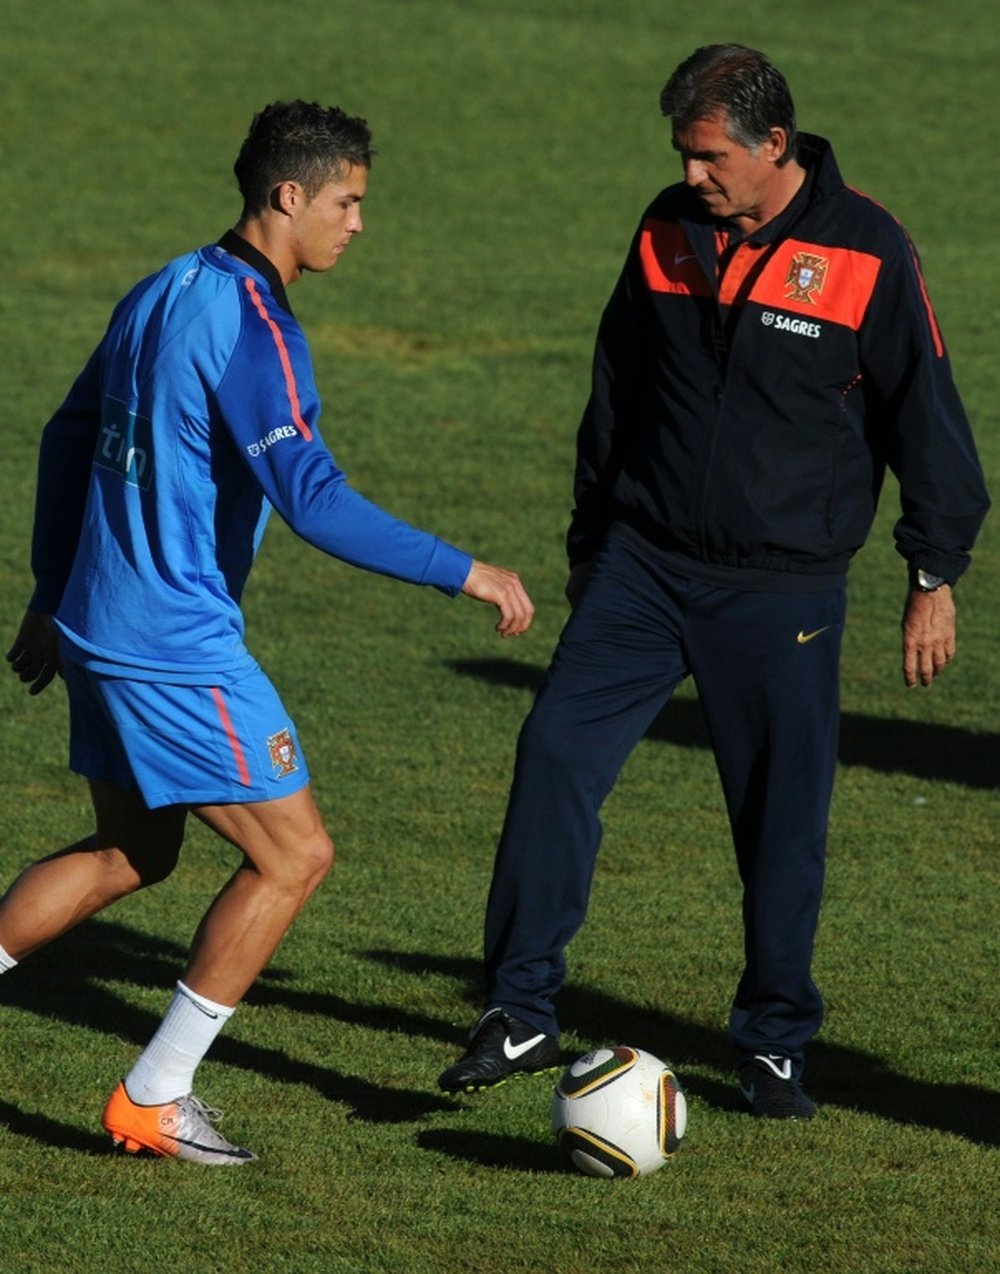 Ronaldo and Queiroz's father-son relationship before international fall-out